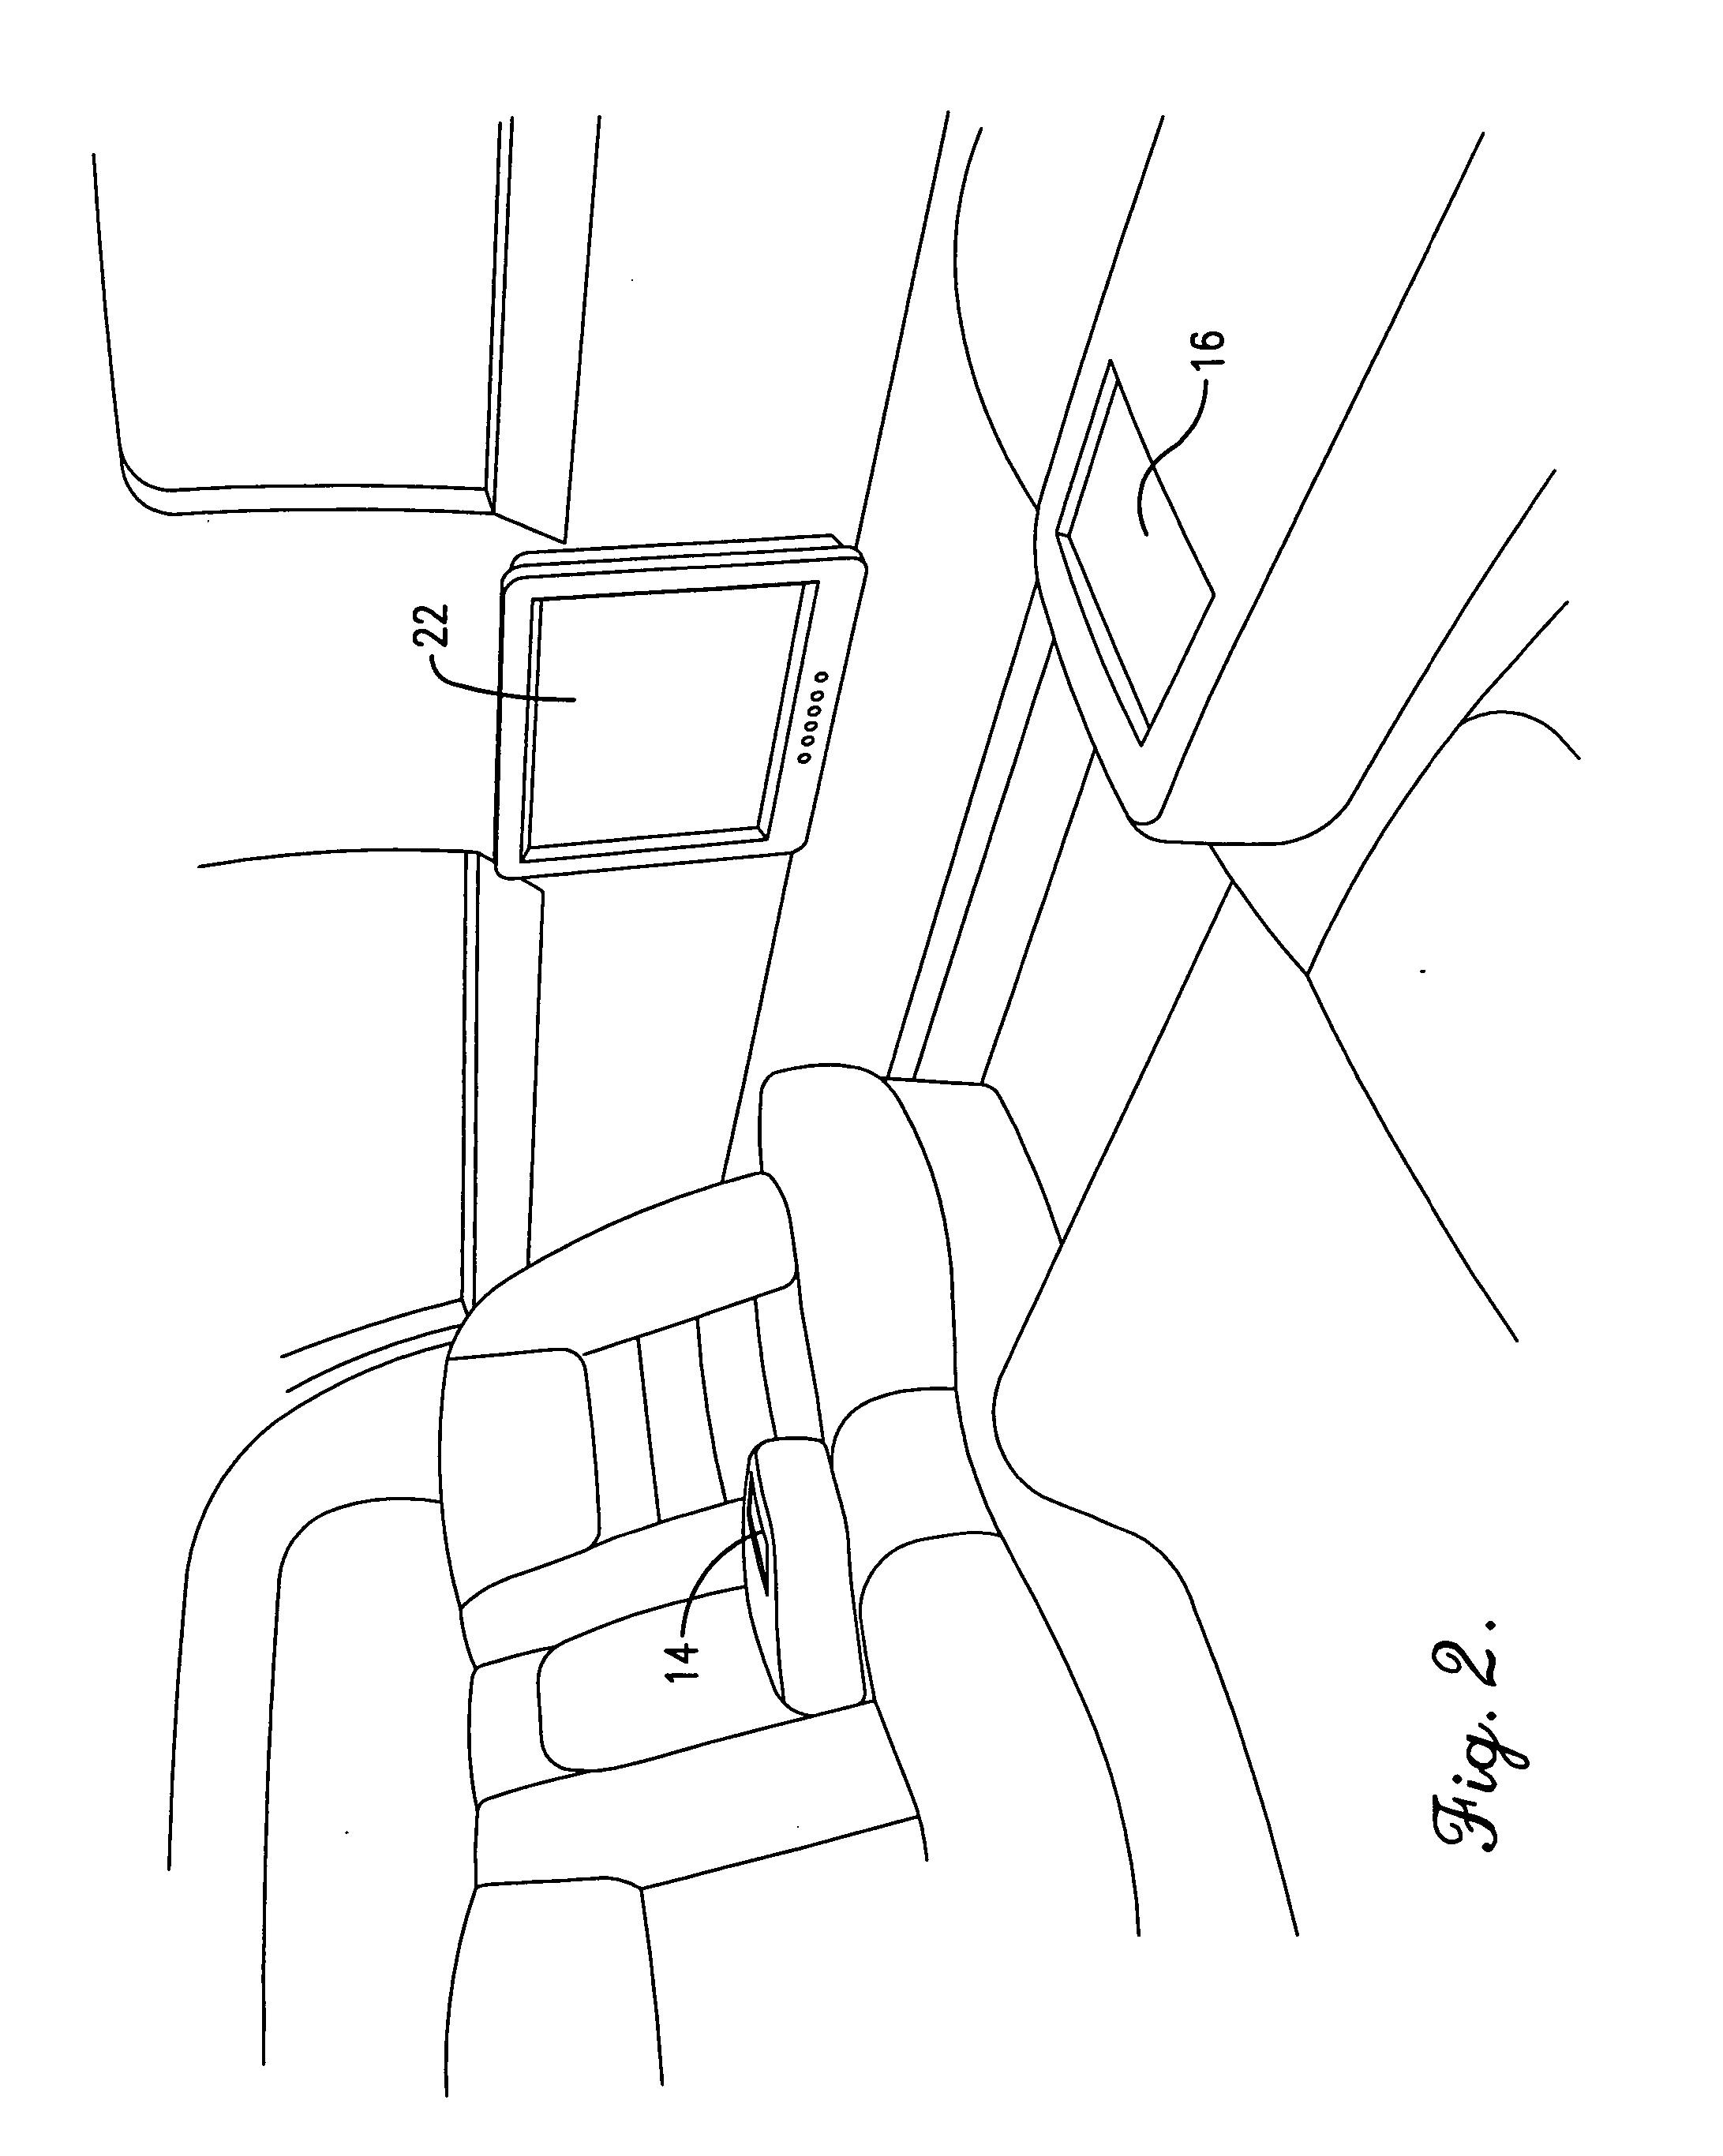 Vehicle entertainment and accessory control system